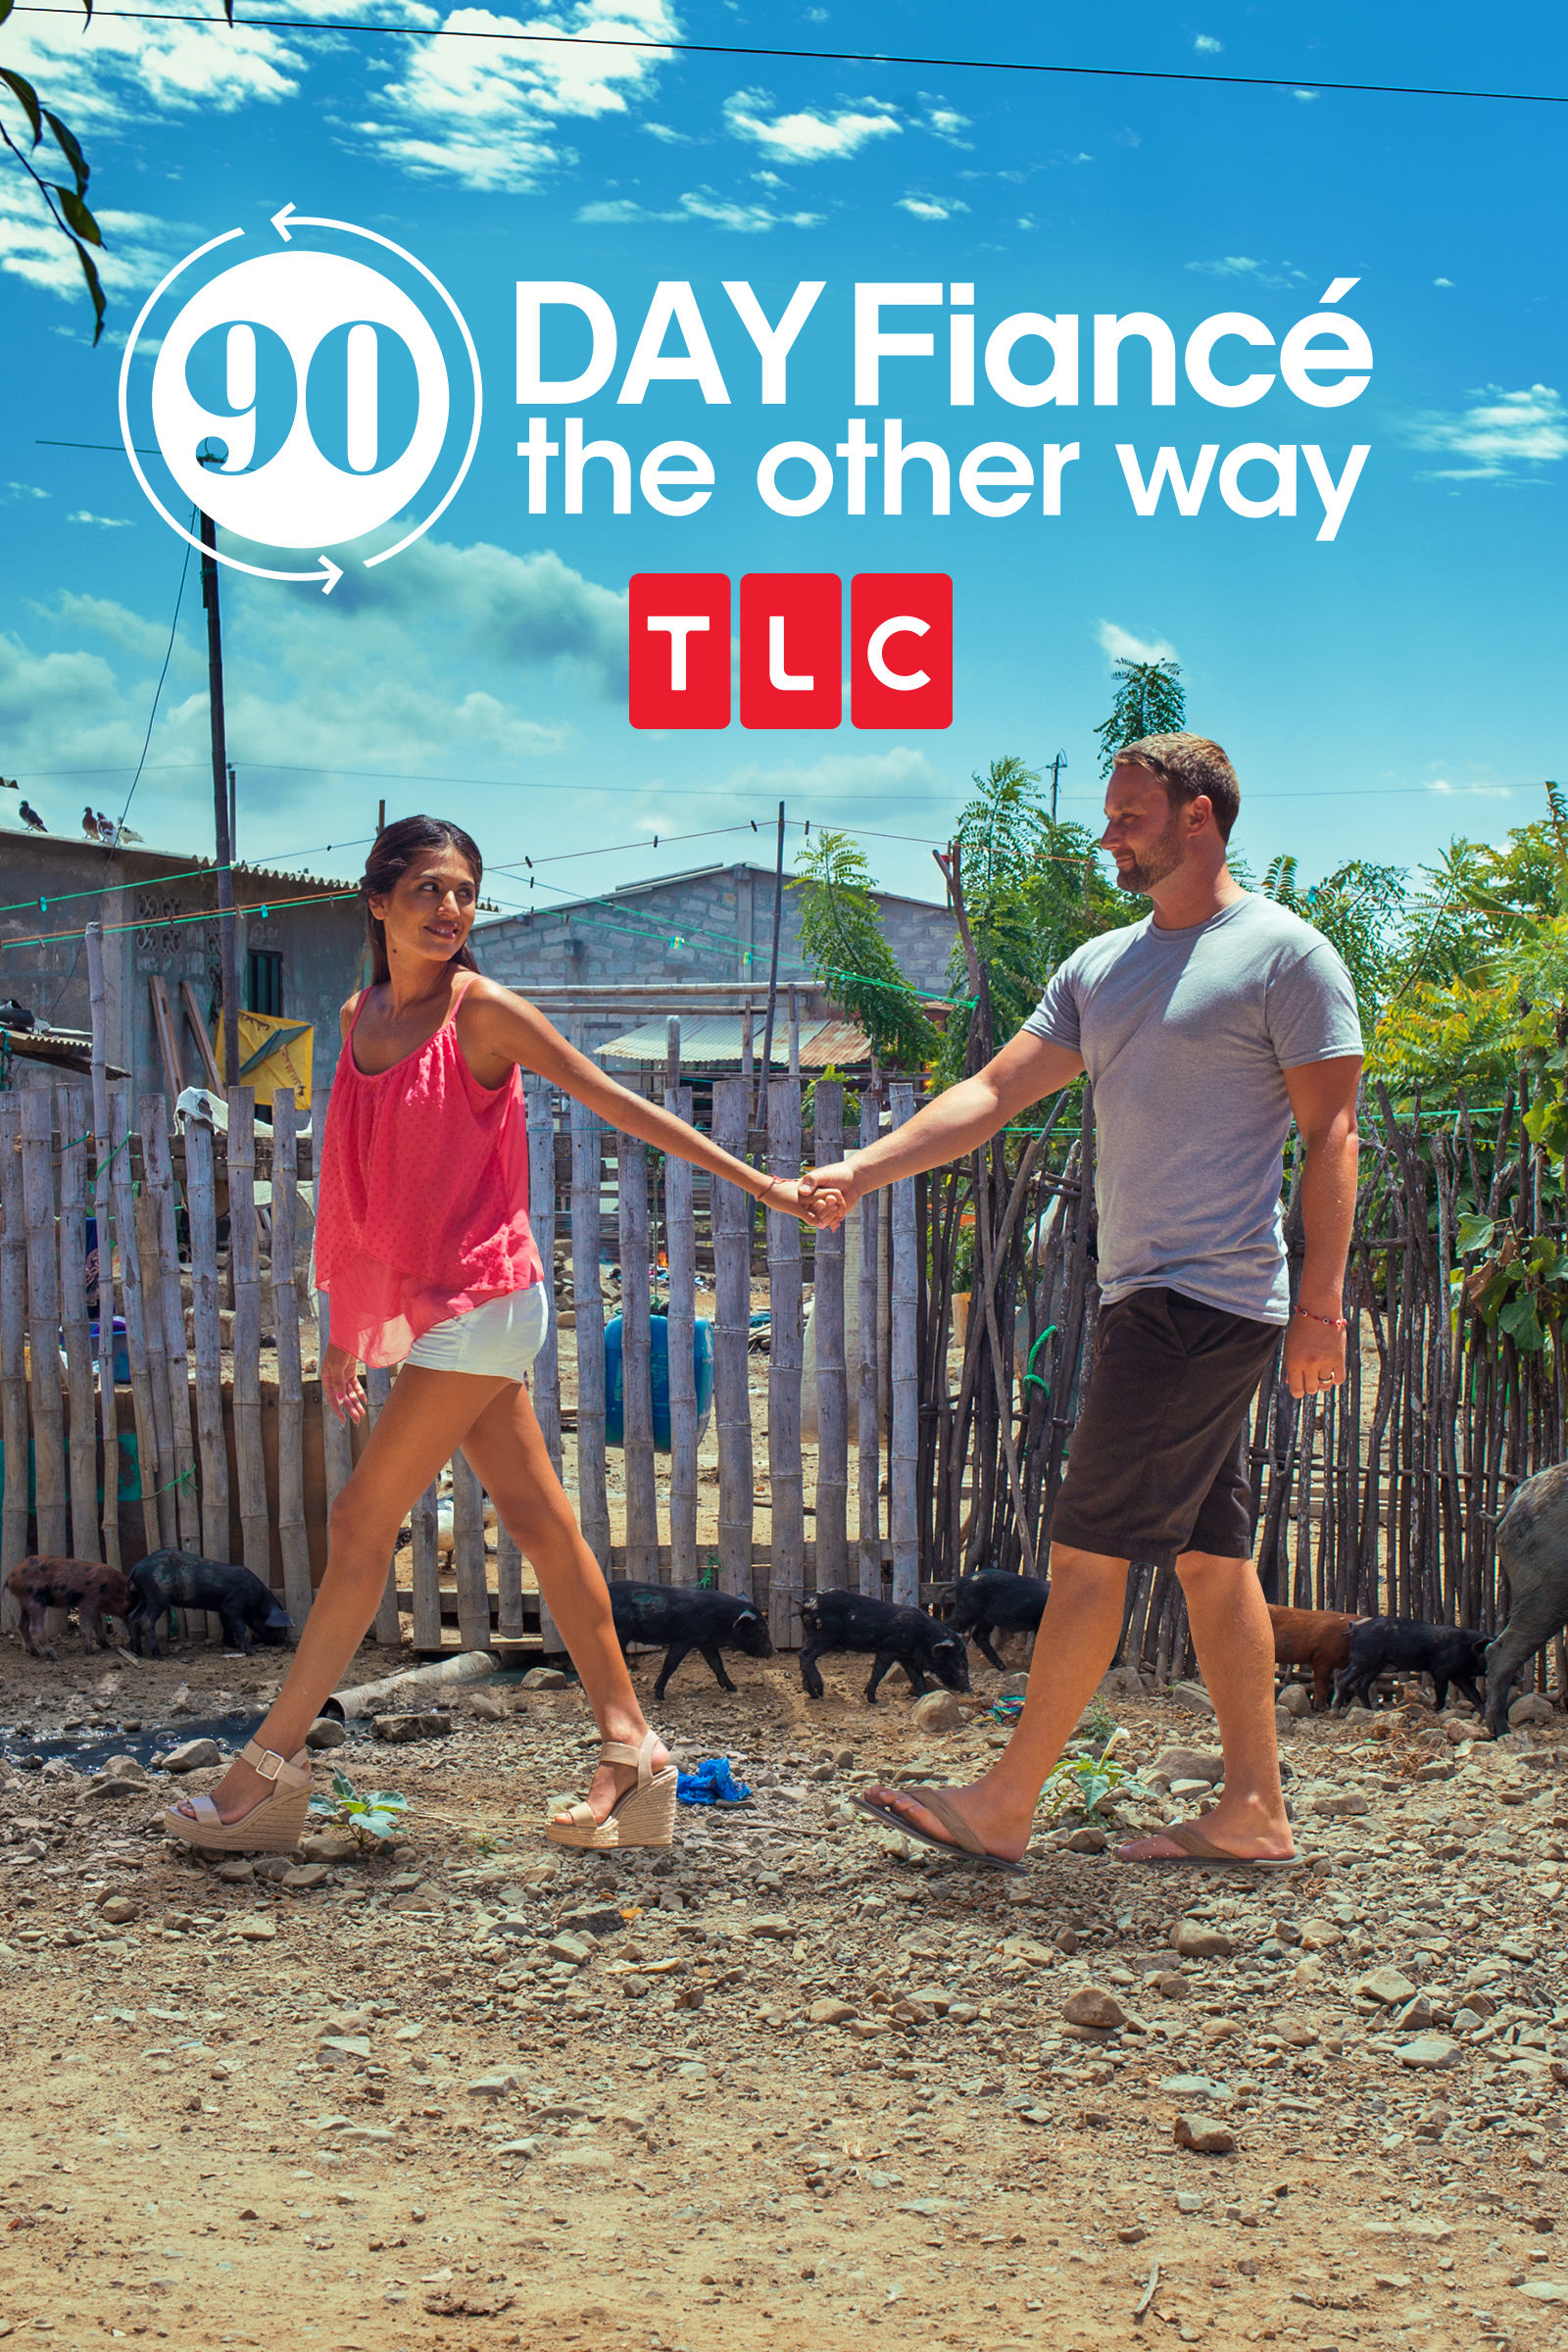 90 Day Fiance Season 9 Watch Online Free - Watch 90 Day Fiancé: The Other Way online free